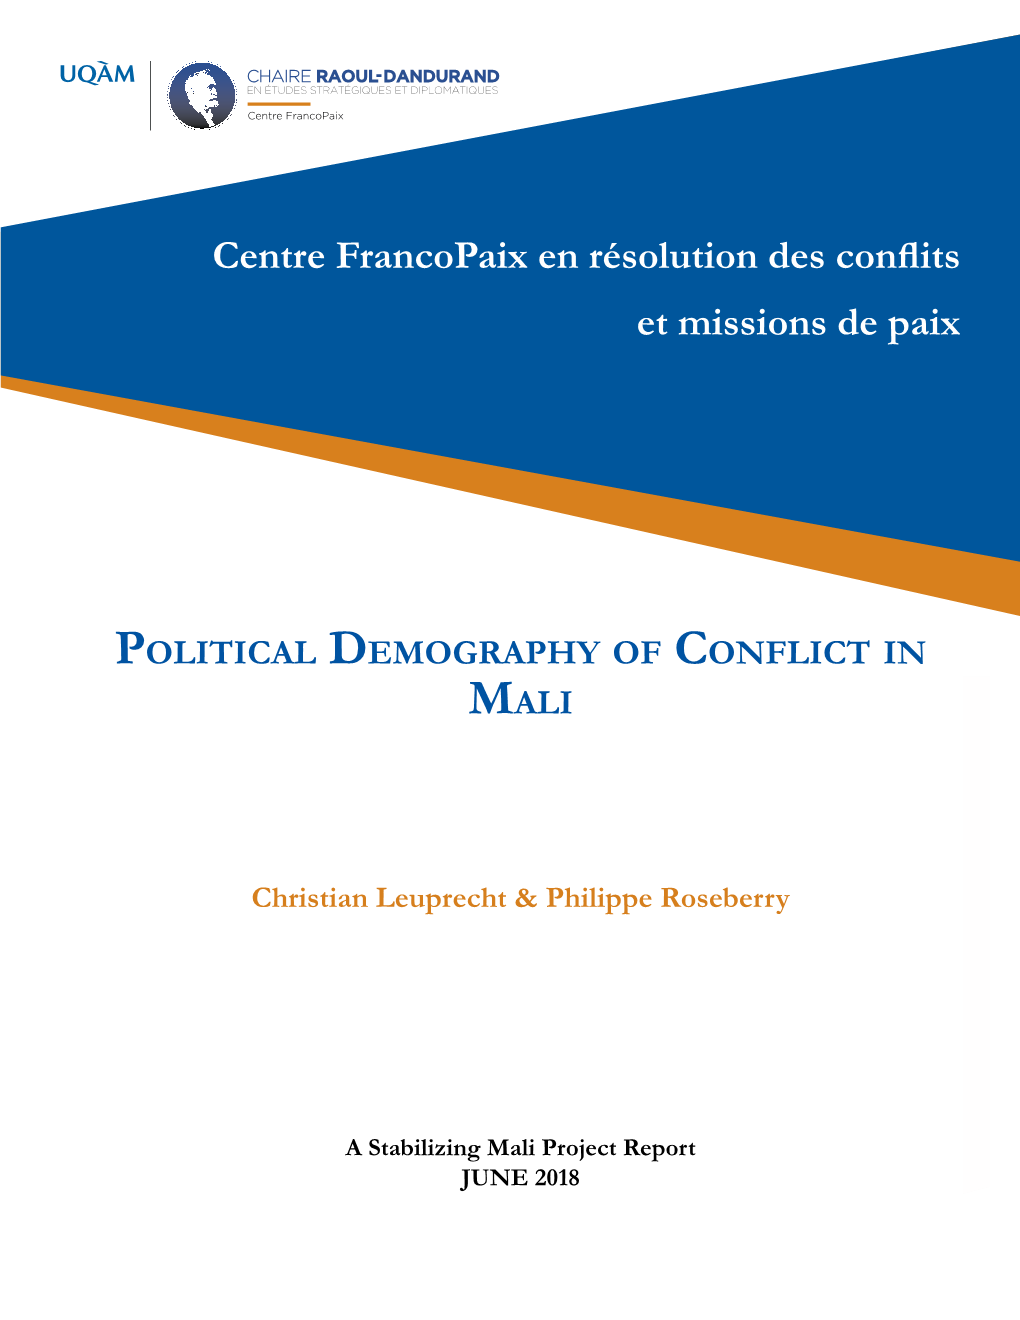 Political Demography of Conflict in Mali